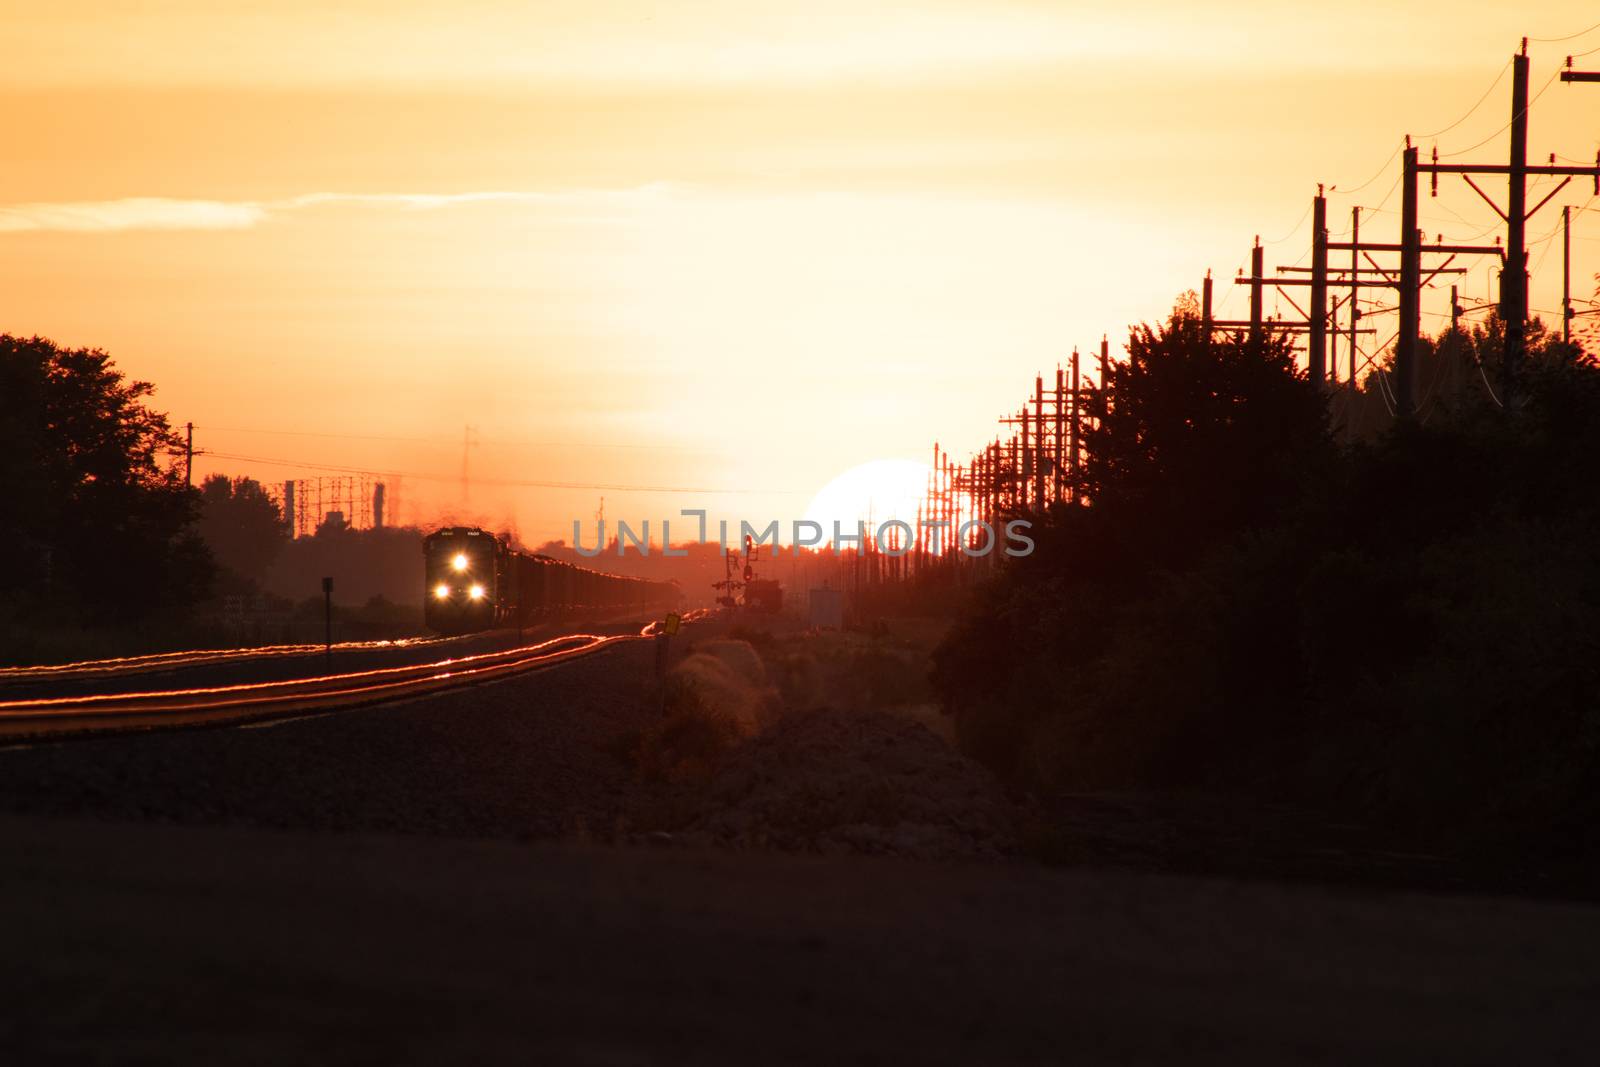 Rail Road crossing and tracks at sunset by gena_wells